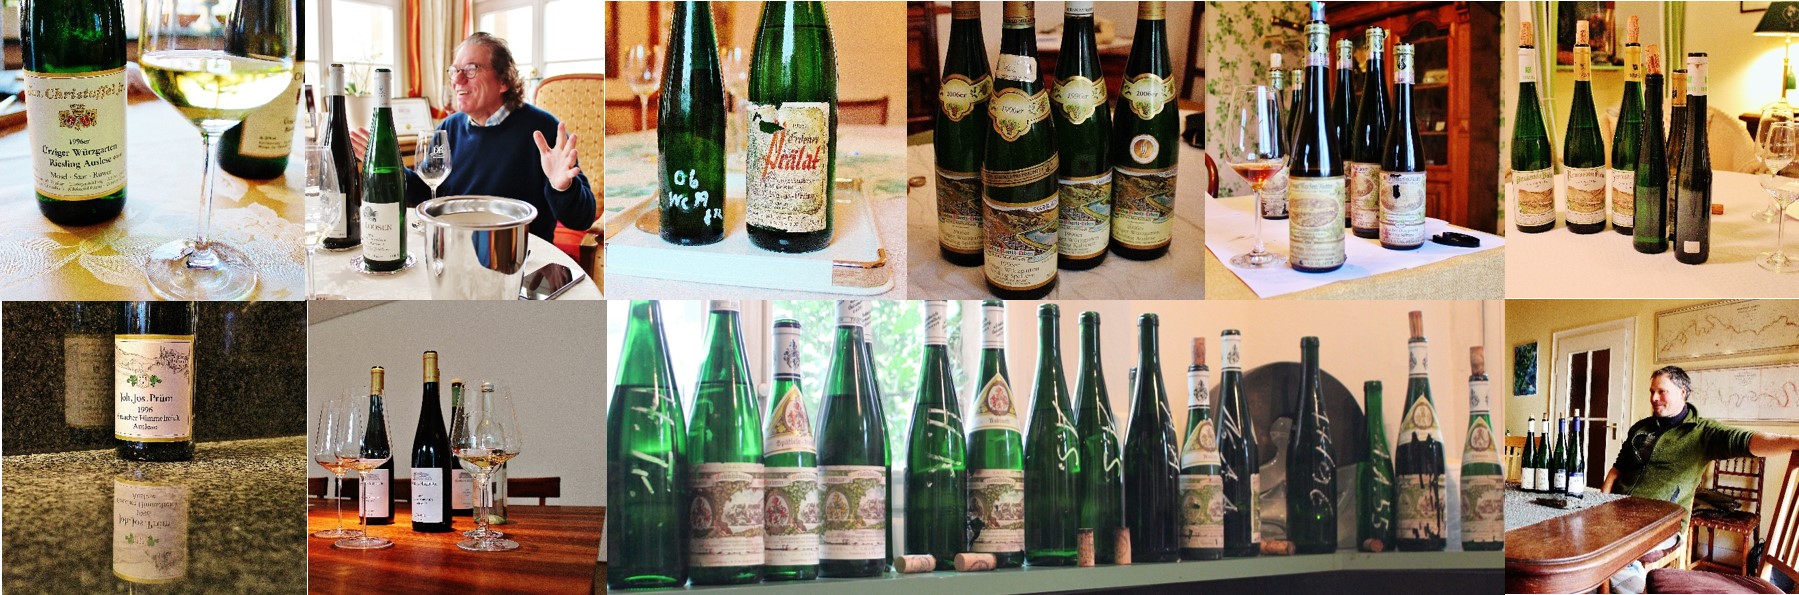 1996 Riesling Retrospective | 50 Wines Re-Tasted